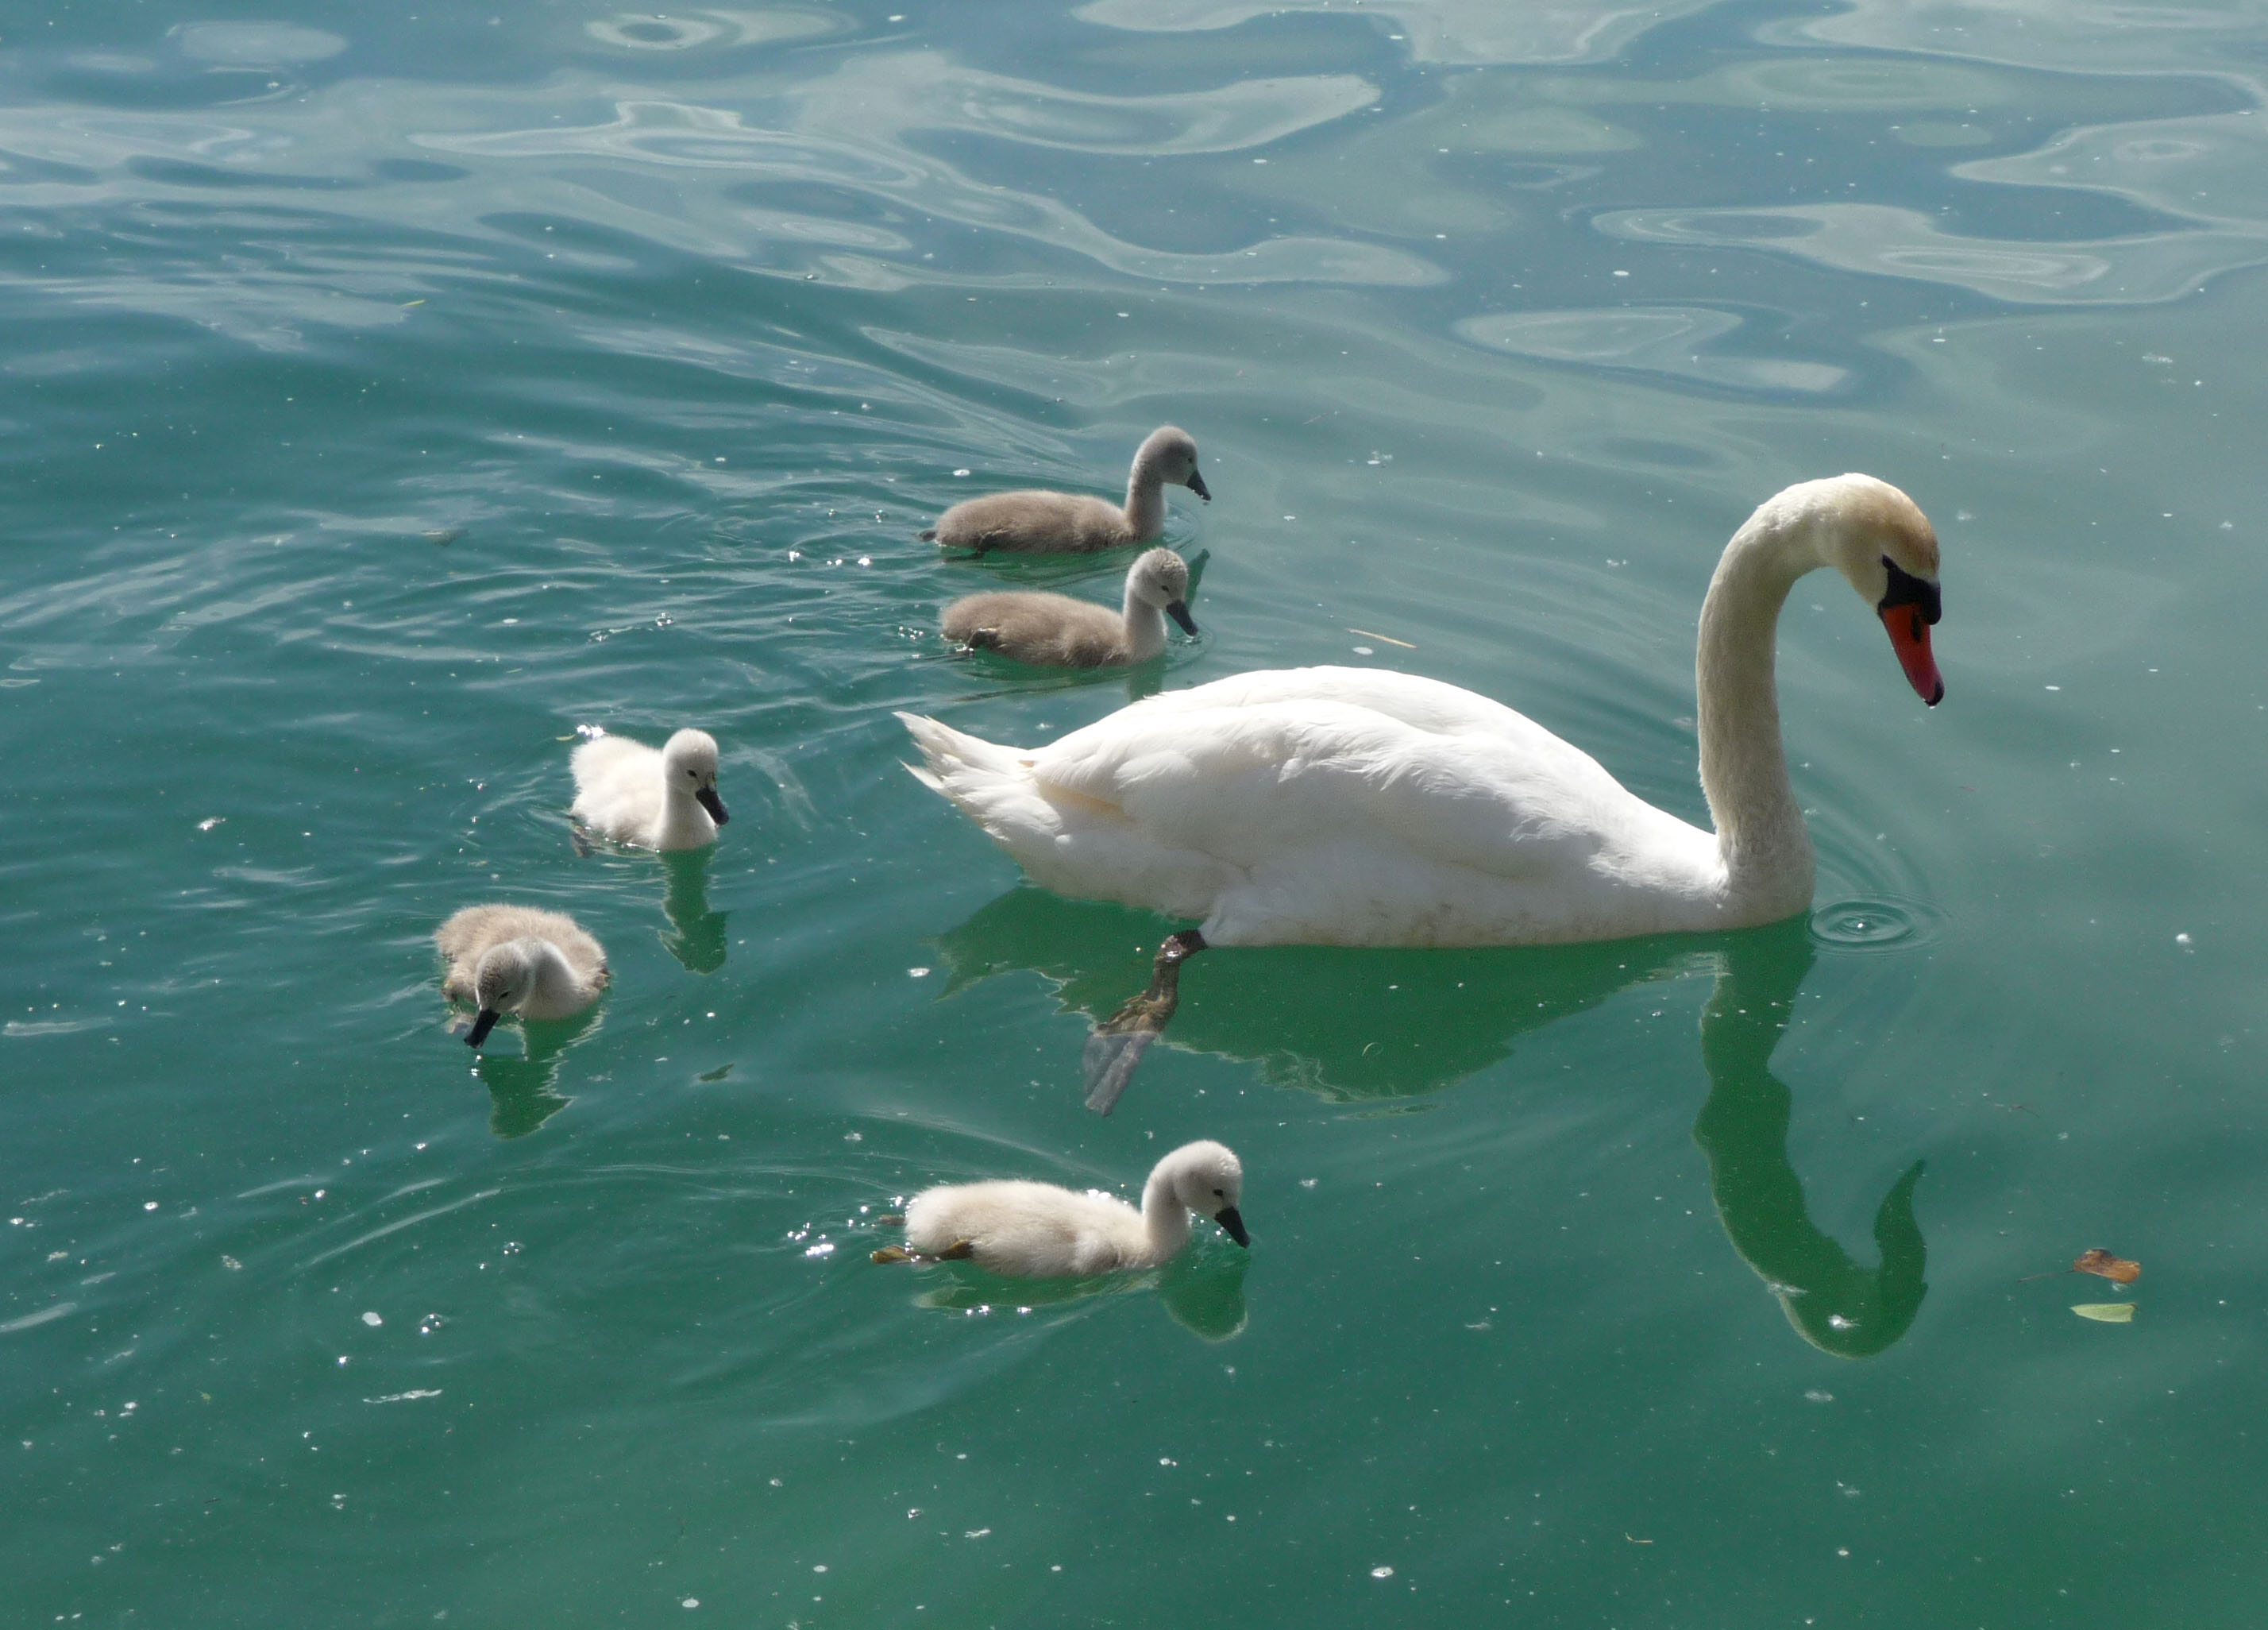 Mute Swan with Cygnets. - Flickr - gailhampshire